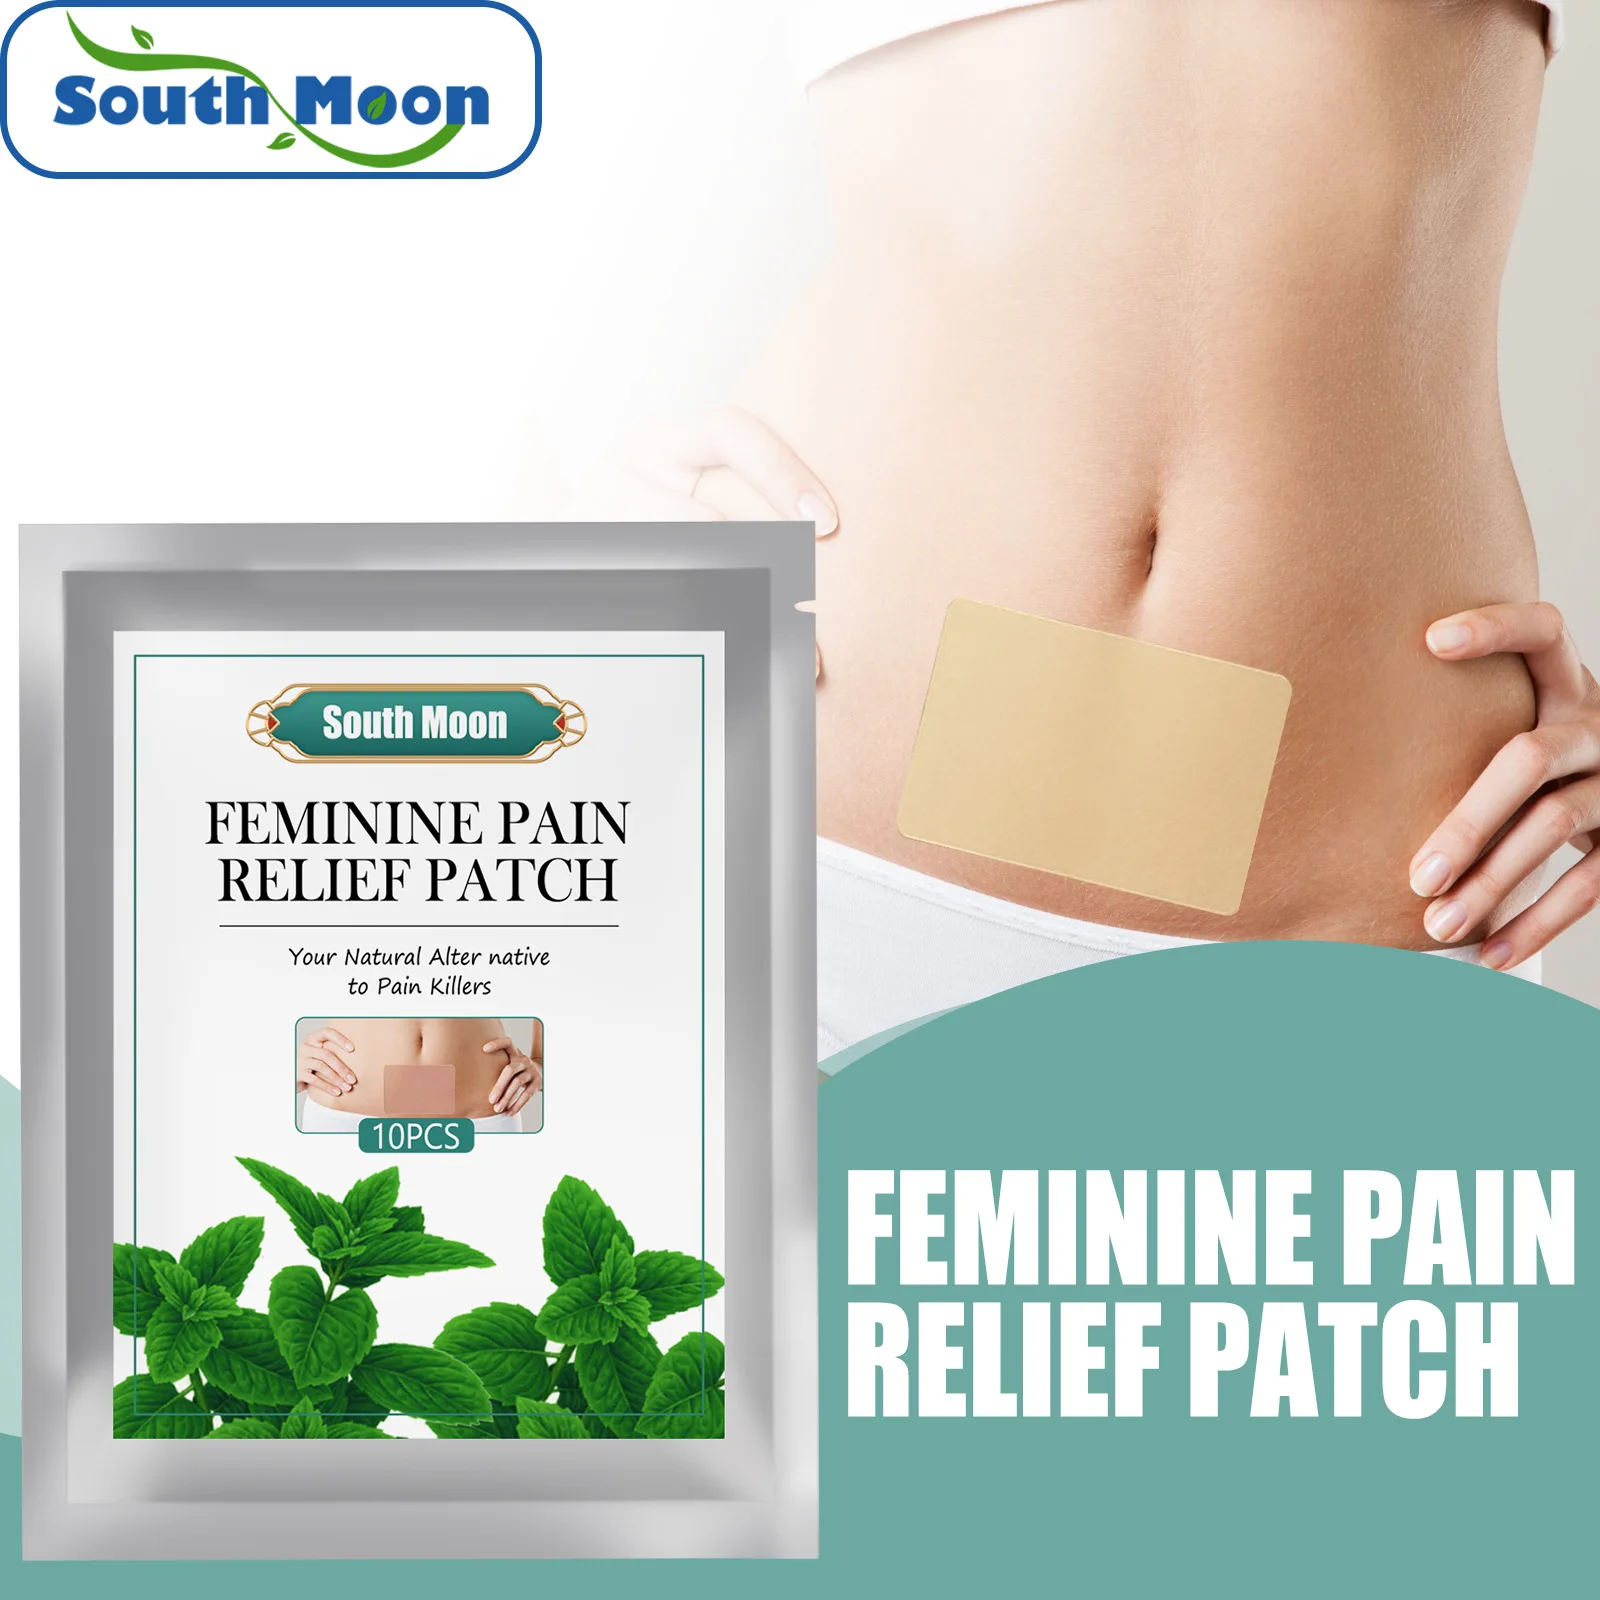 

South Moon Dysmenorrhea Pain Relieving Patch Heat Bod Warmer Stick Palace Cold Cramp Women Period Menalgia Menstrual 30g